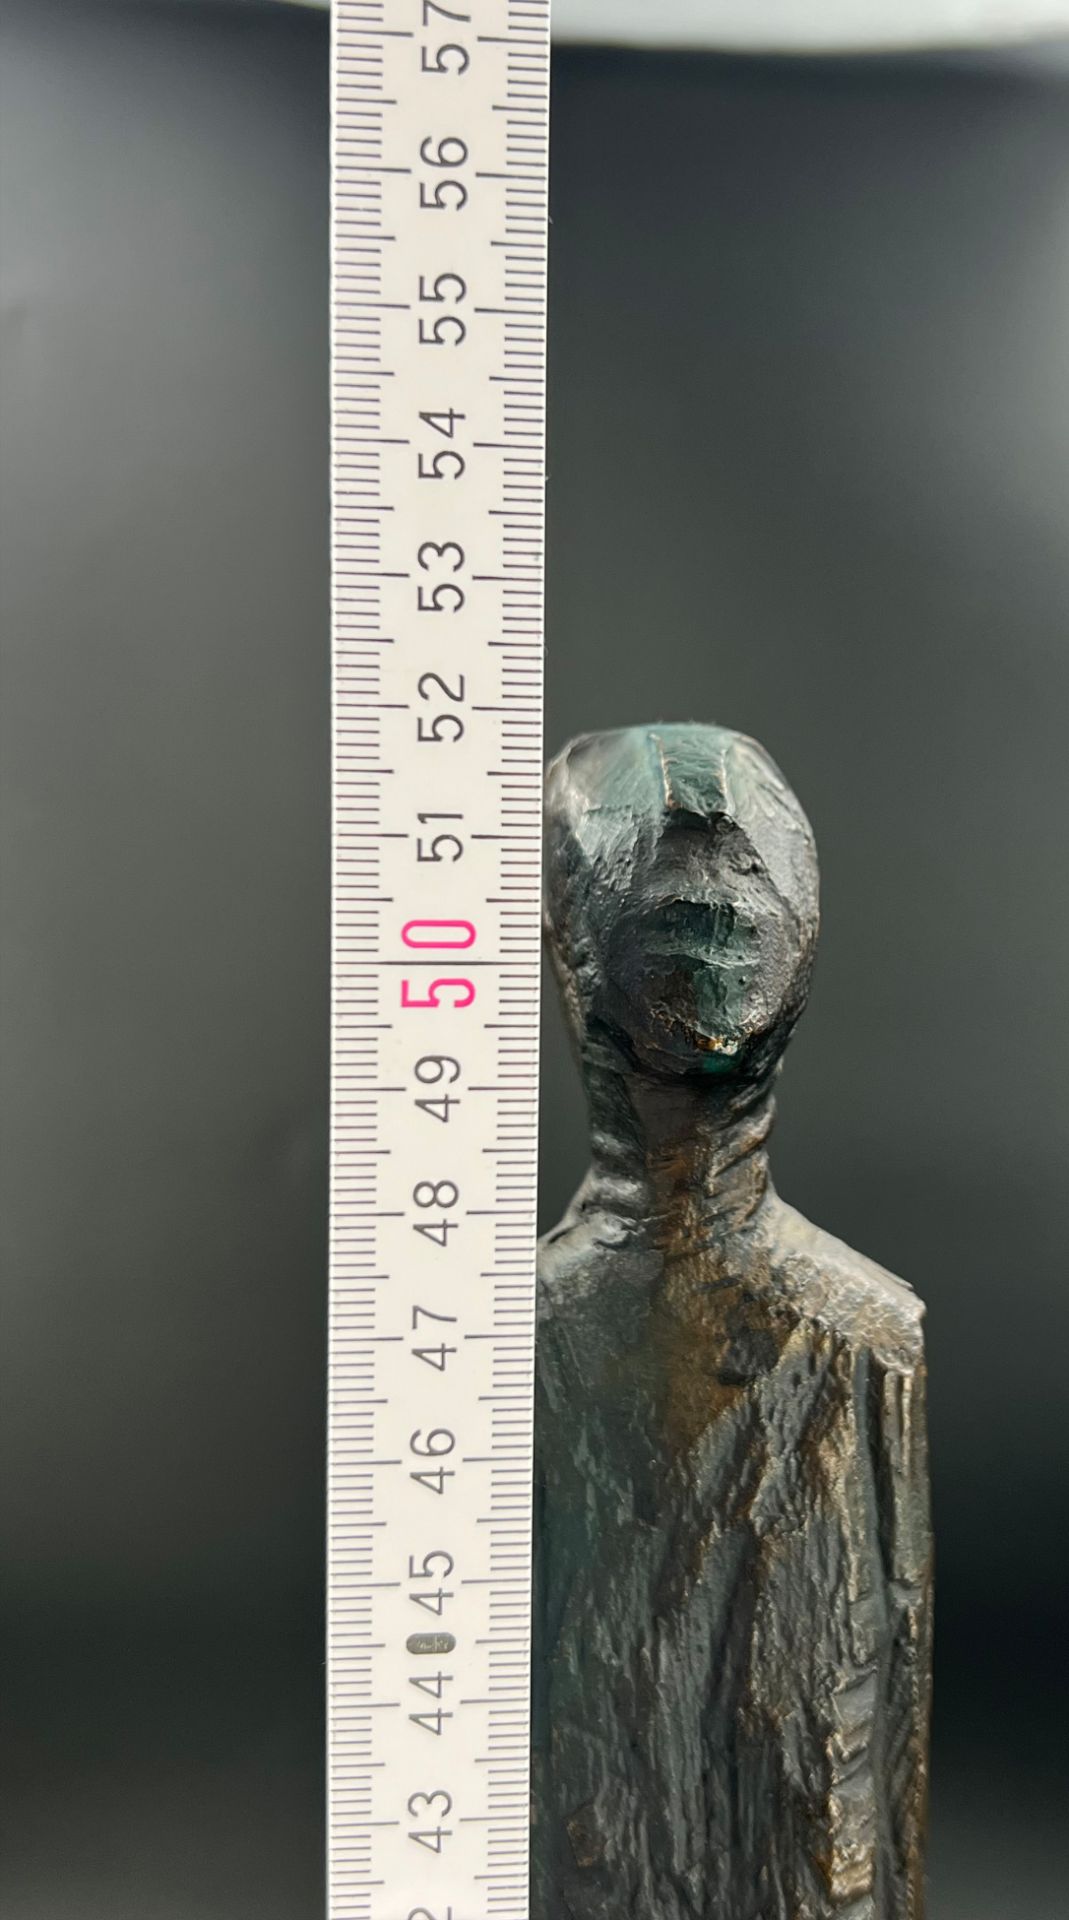 Walter SCHEMBS (1956). Bronze. "Small stele". - Image 10 of 10